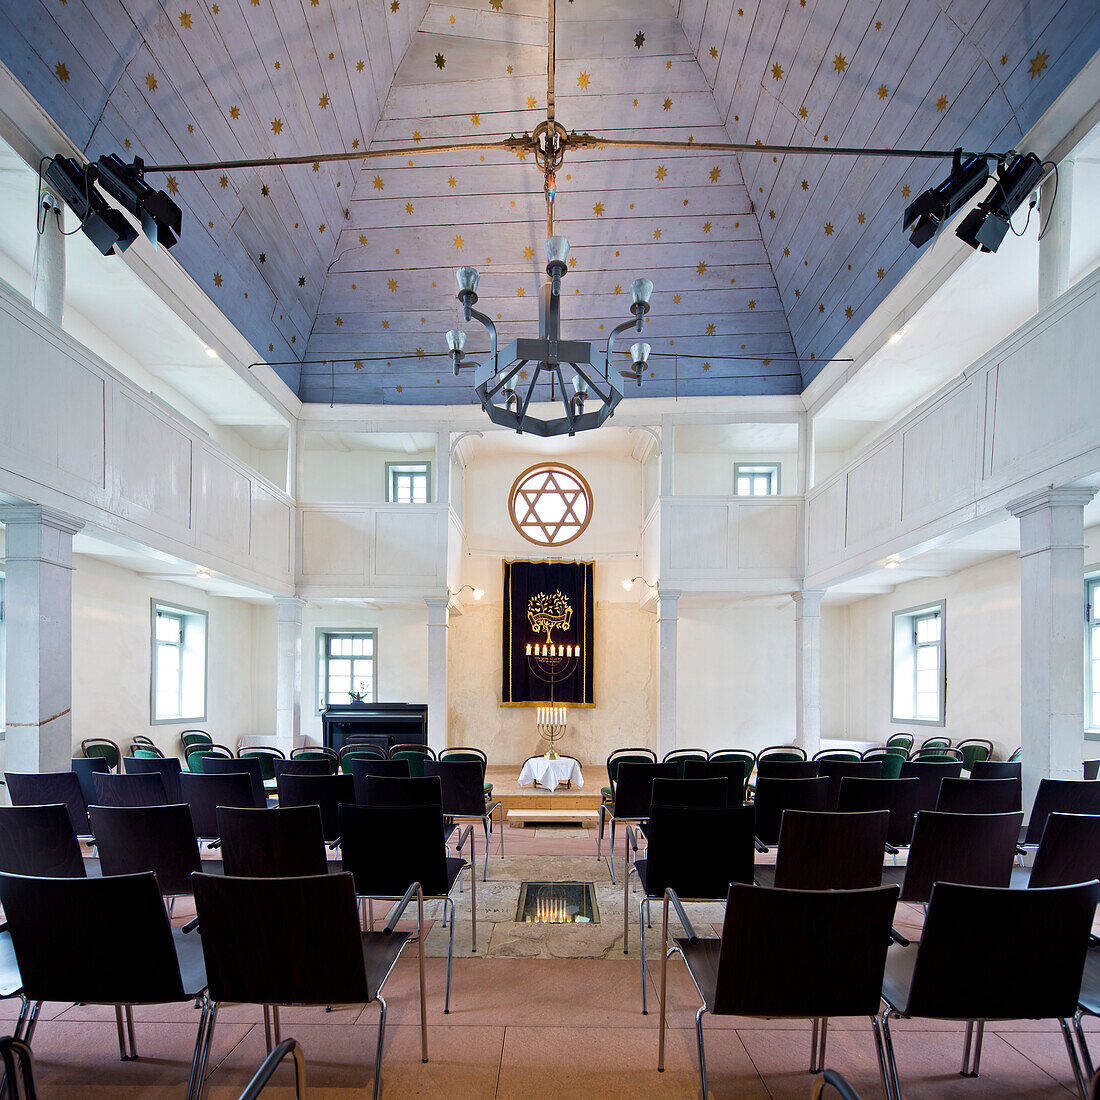 Interior of Voehl Synagogue with a seven-branched candelabrum, Voehl, Hesse, Germany, Europe